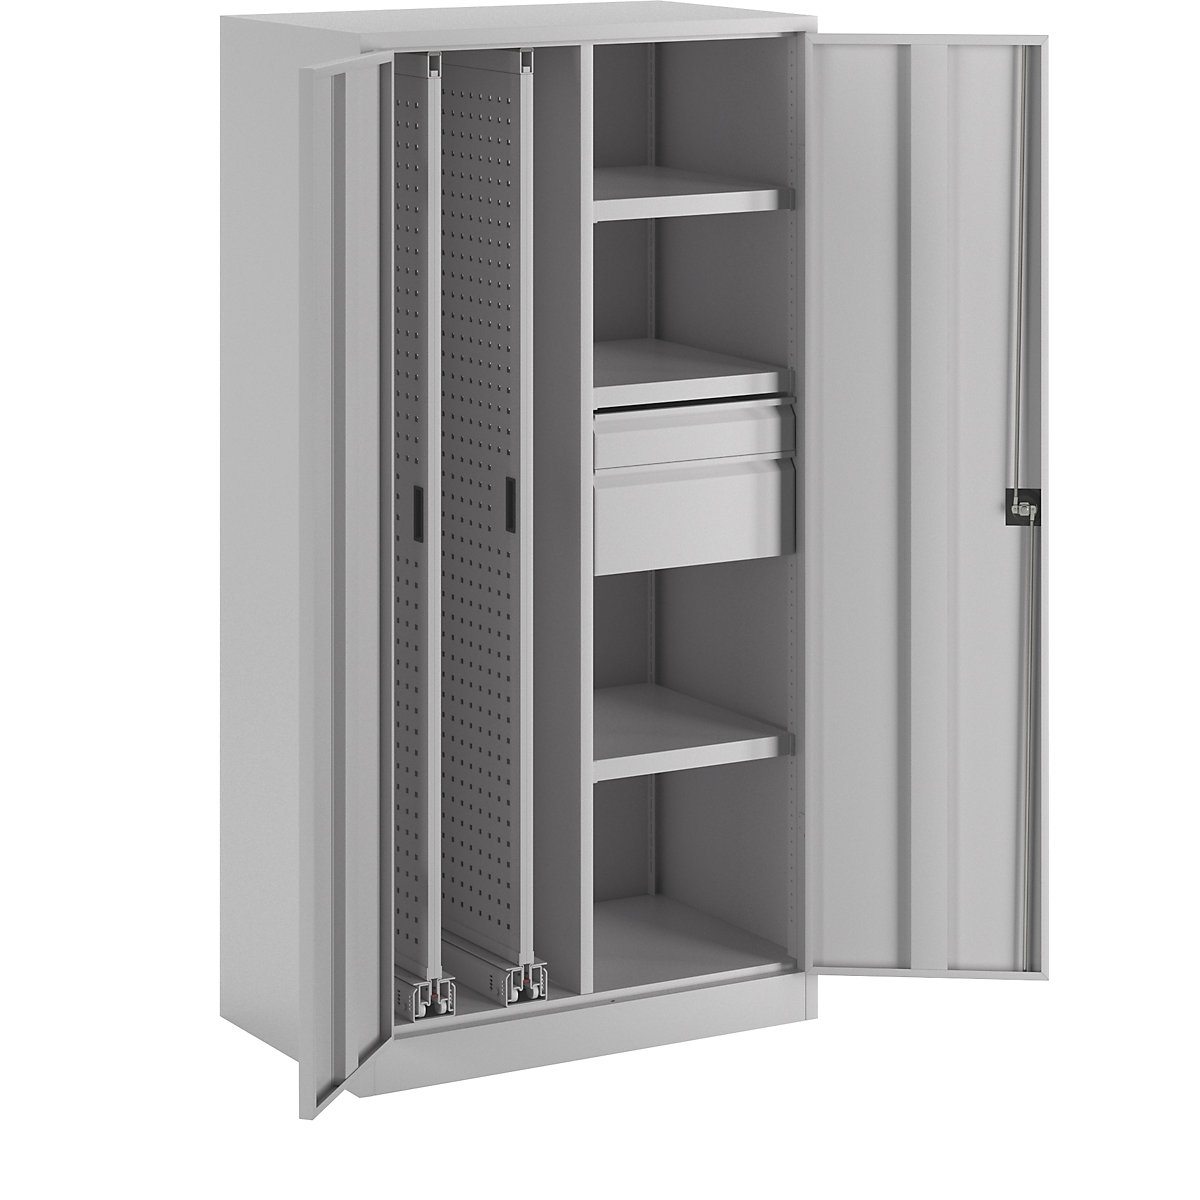 Vertical pull-out cupboard - Pavoy